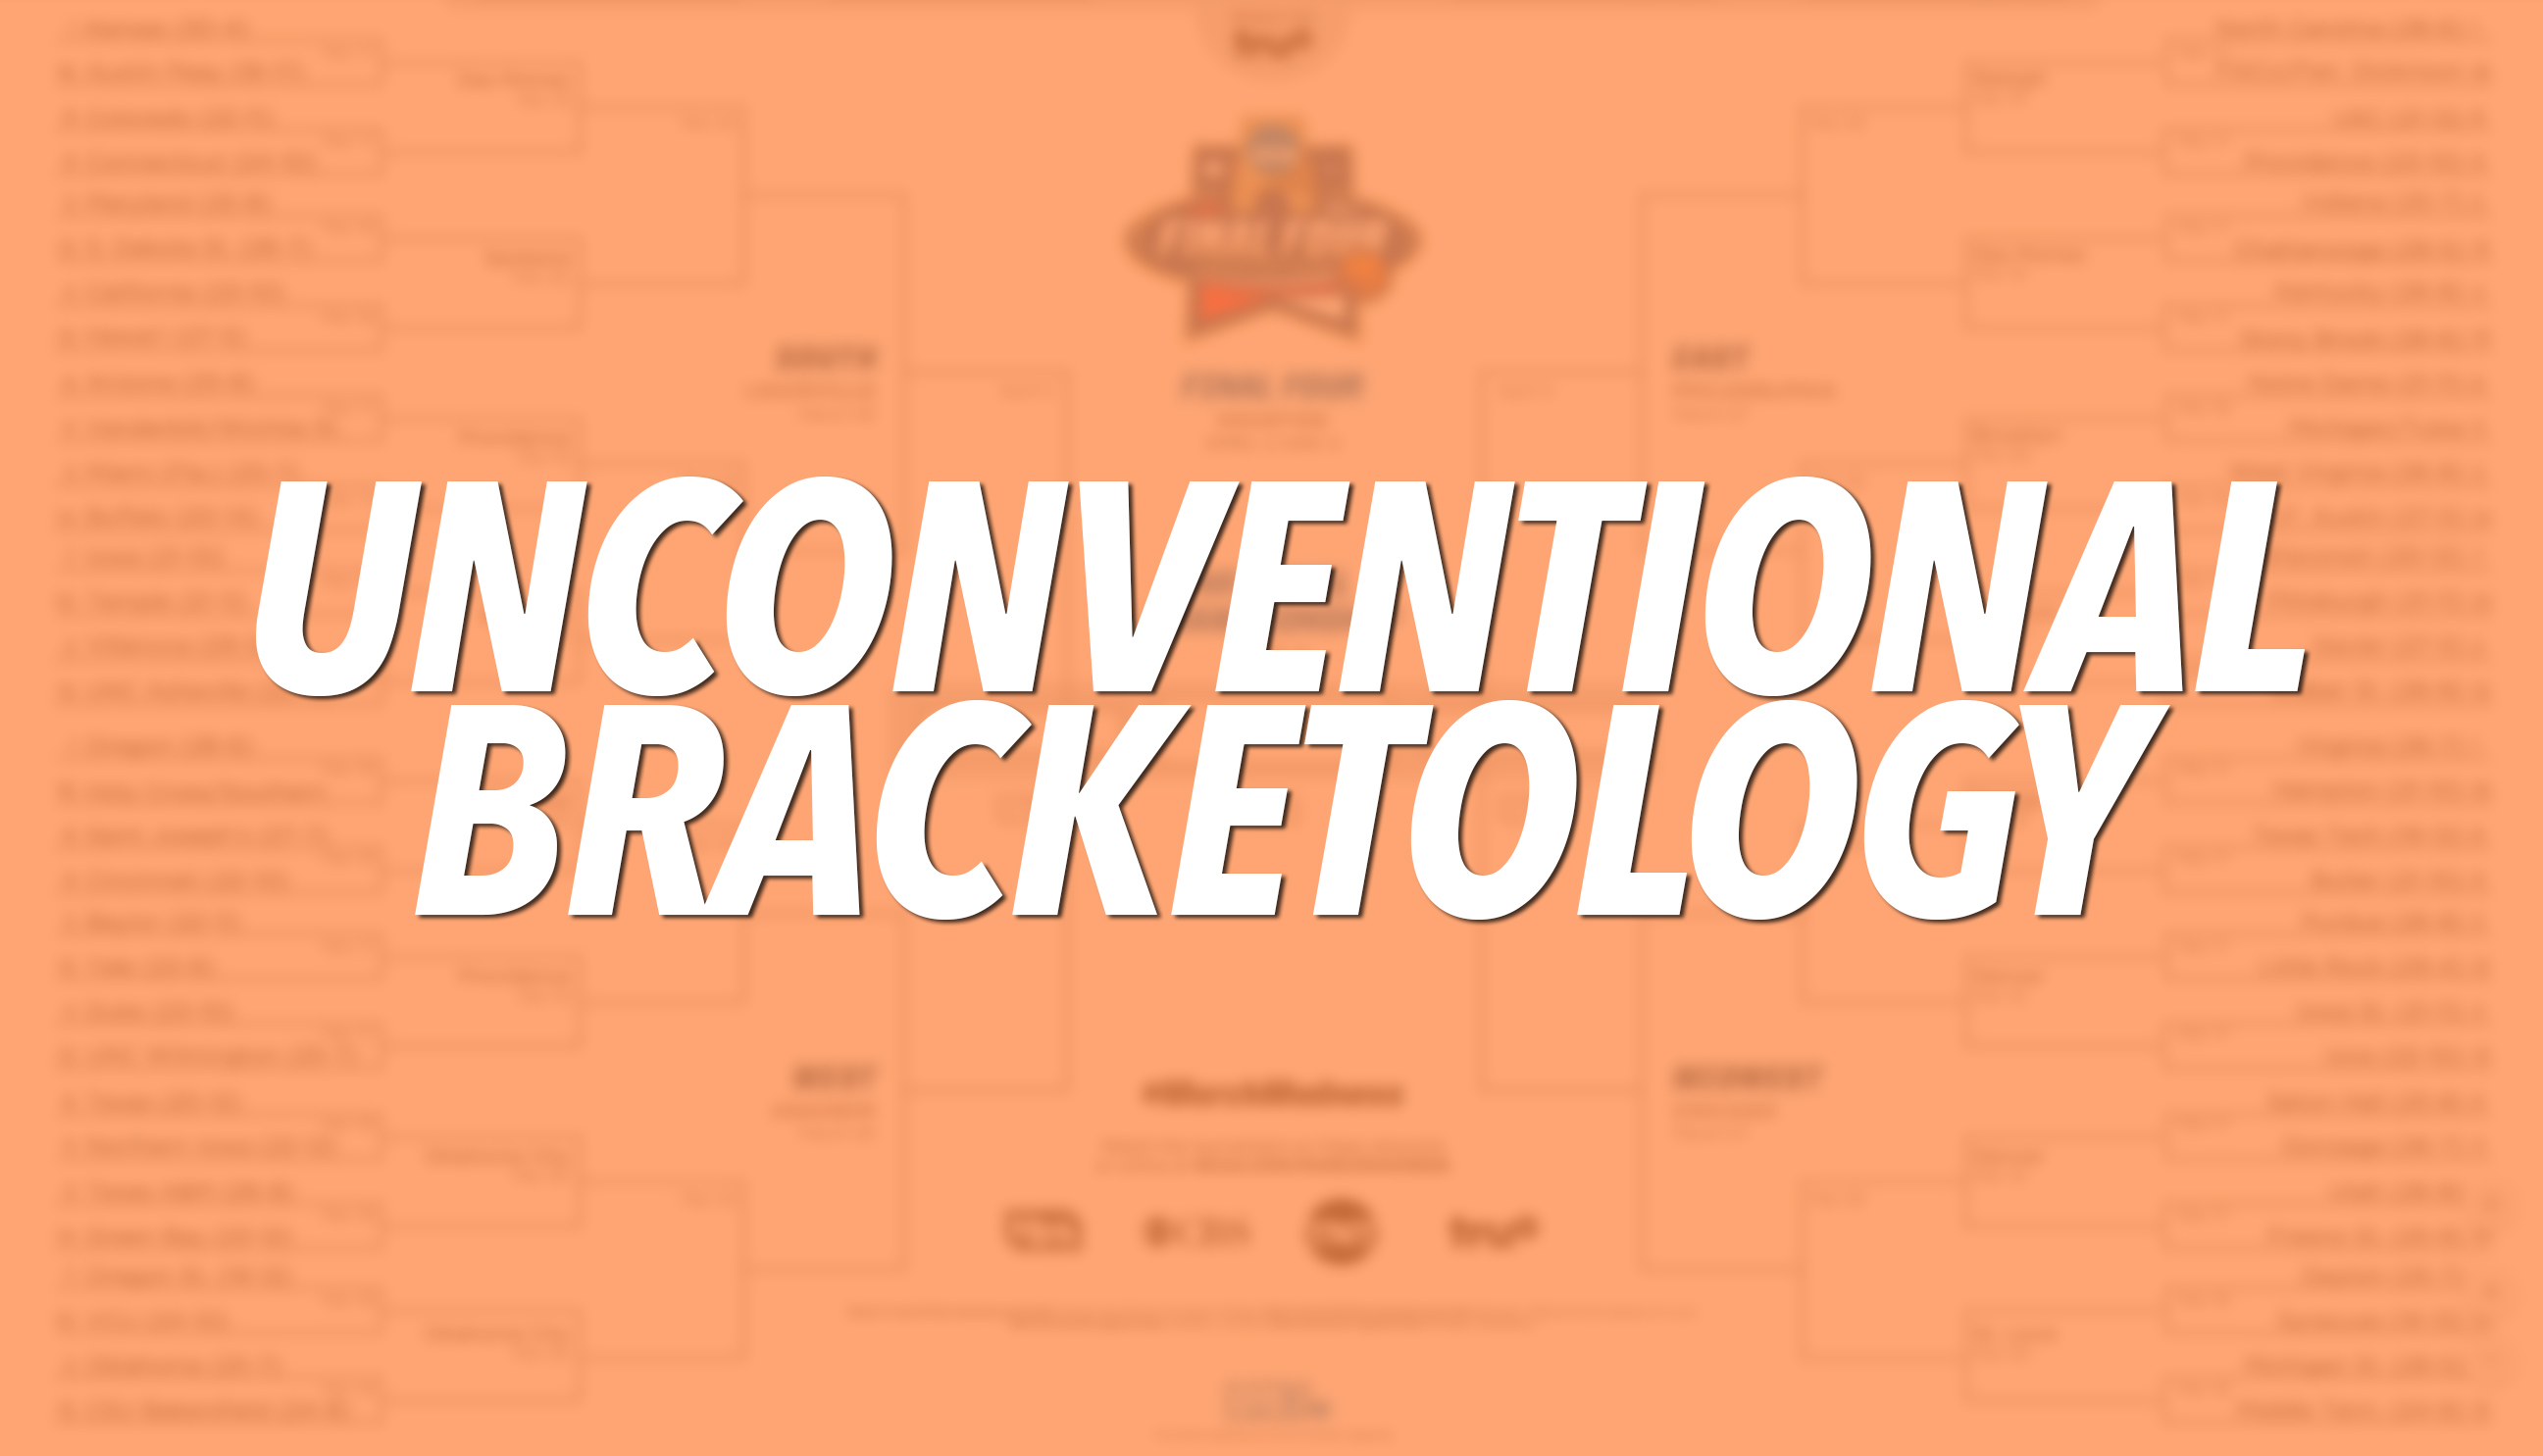 Objective Bracketology: Be the Only One in Your Pool to Use These Methods